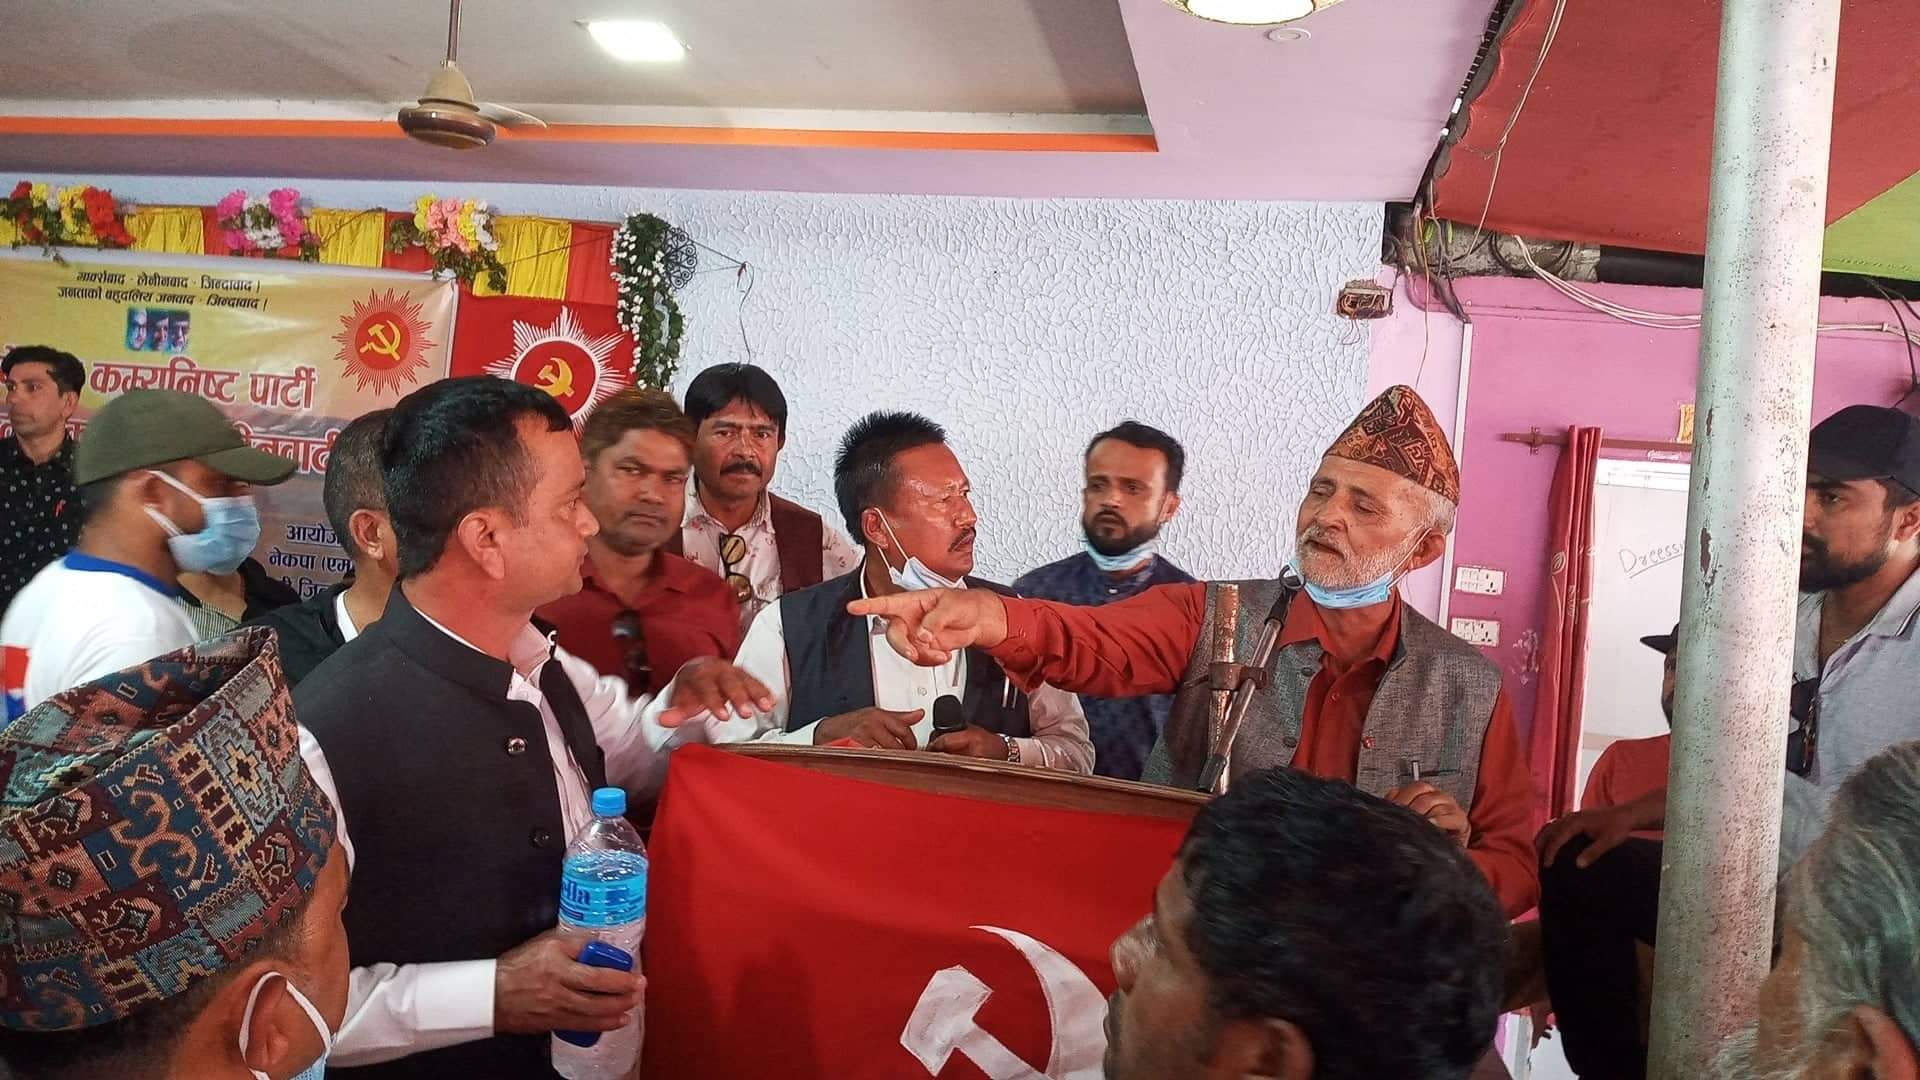 Sunsari UML dispute: Dwarika Chaudhary snatches microphone while Chairperson speaks